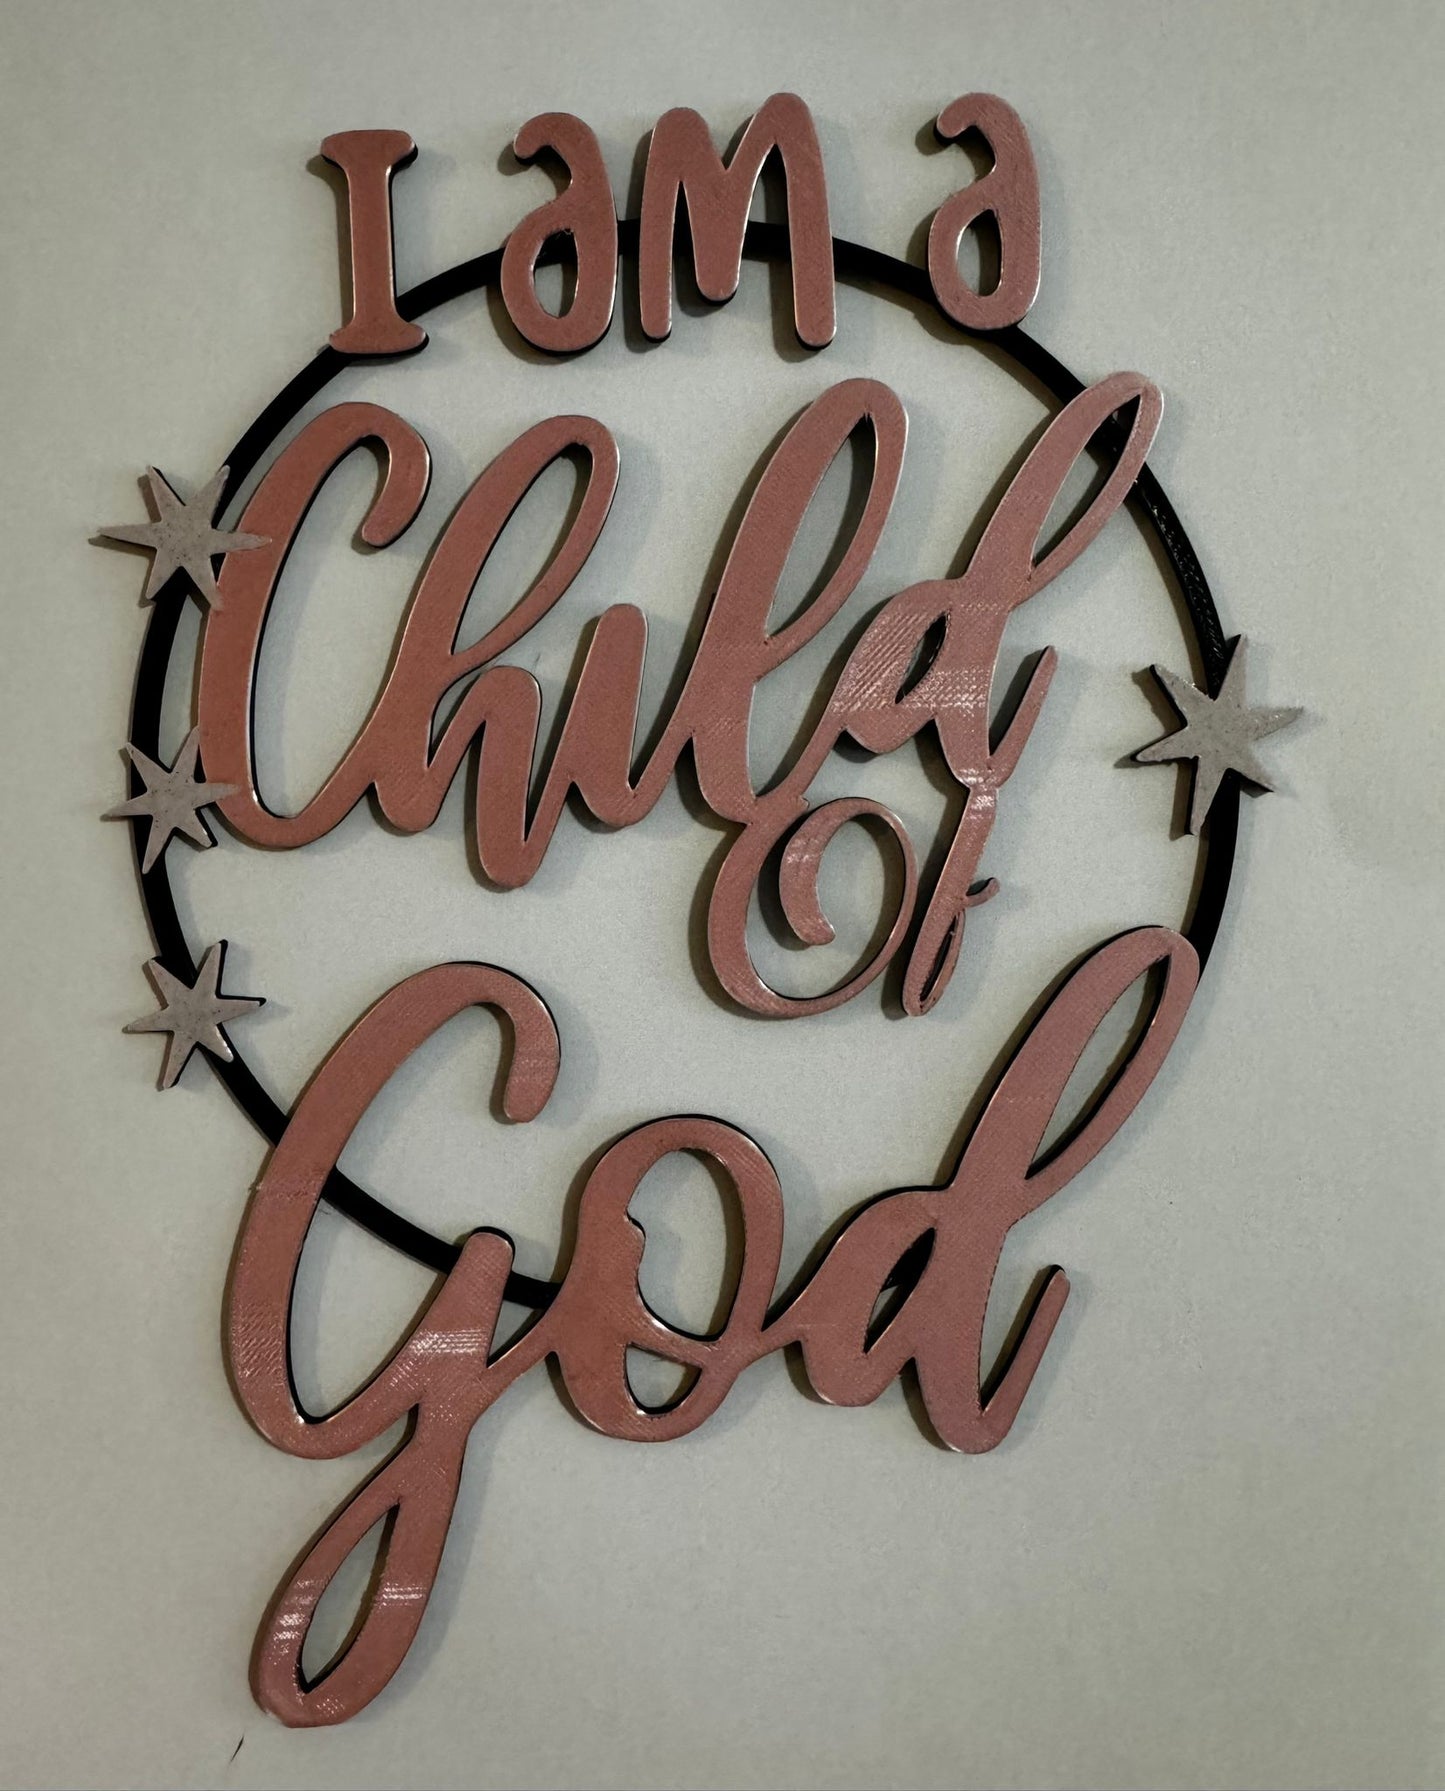 I am a Child of G-d